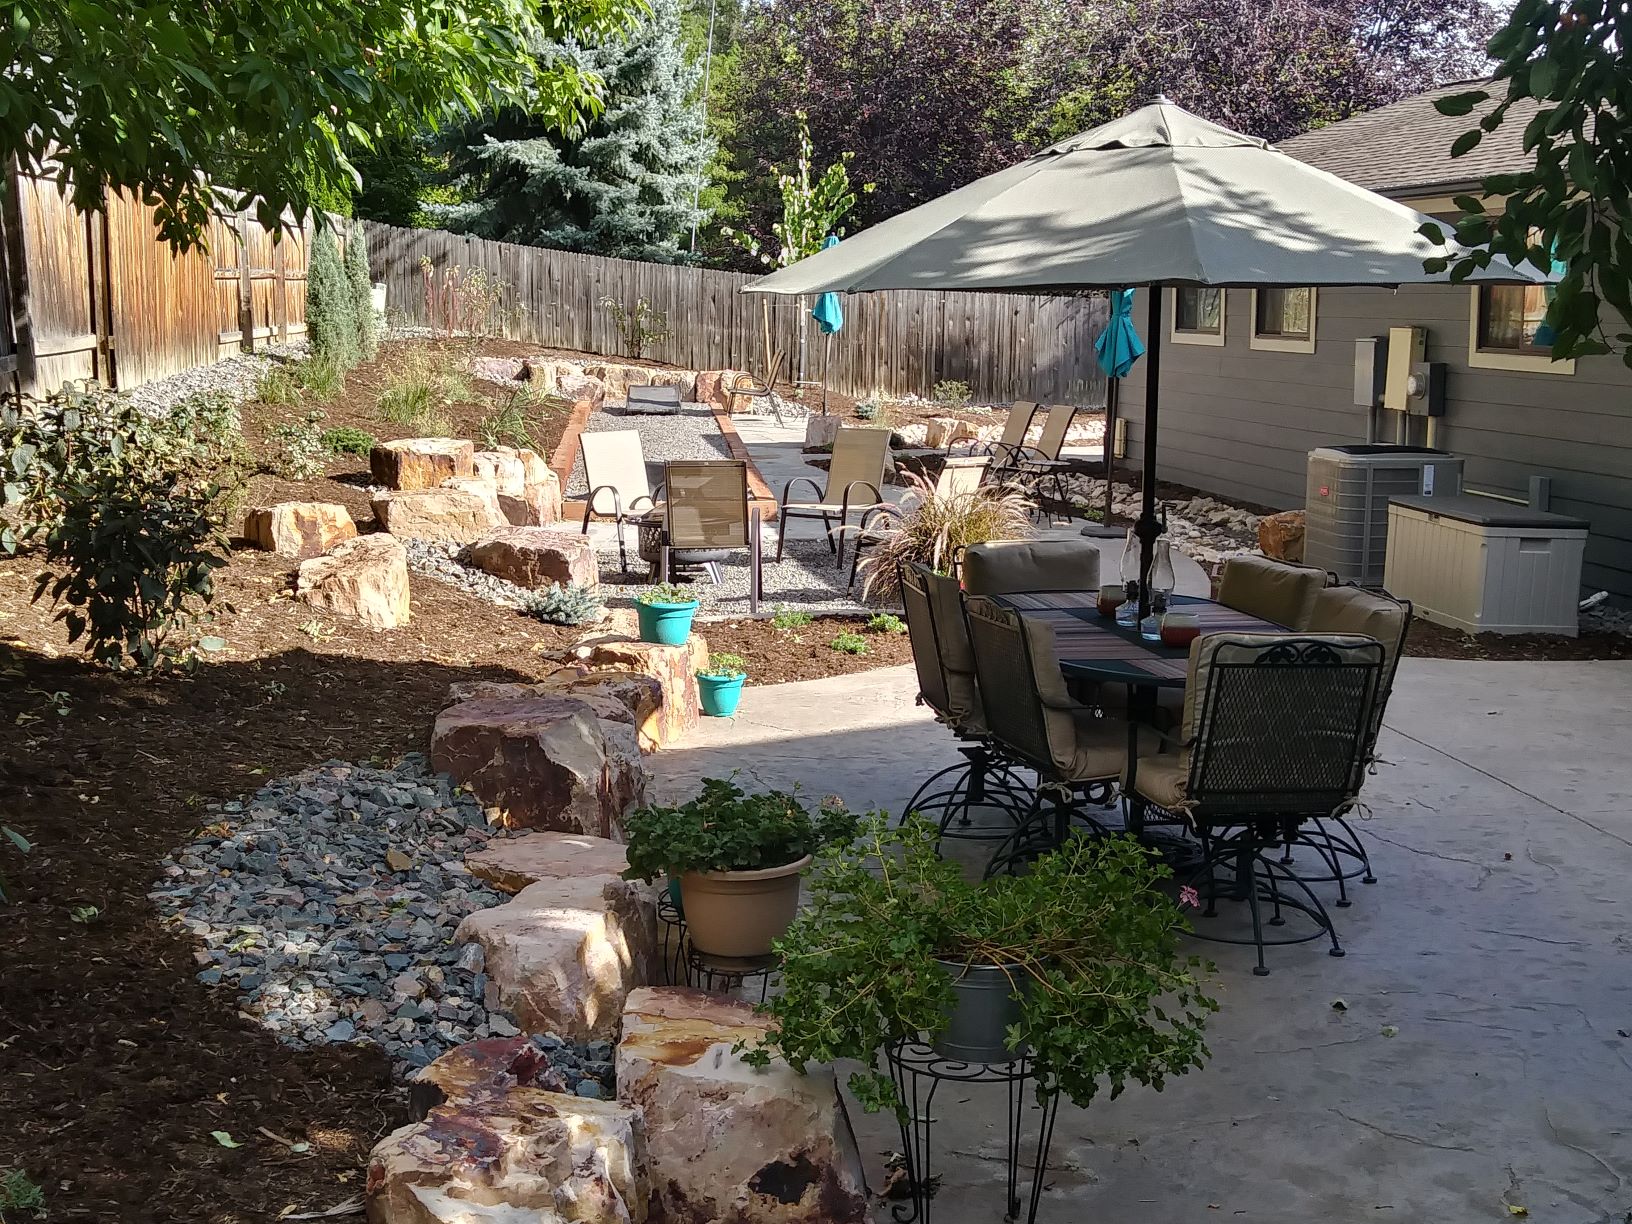 Backyard seating area with flat stone patio and gravel chair area. Surrounded by mulch with low water bushes and plants.